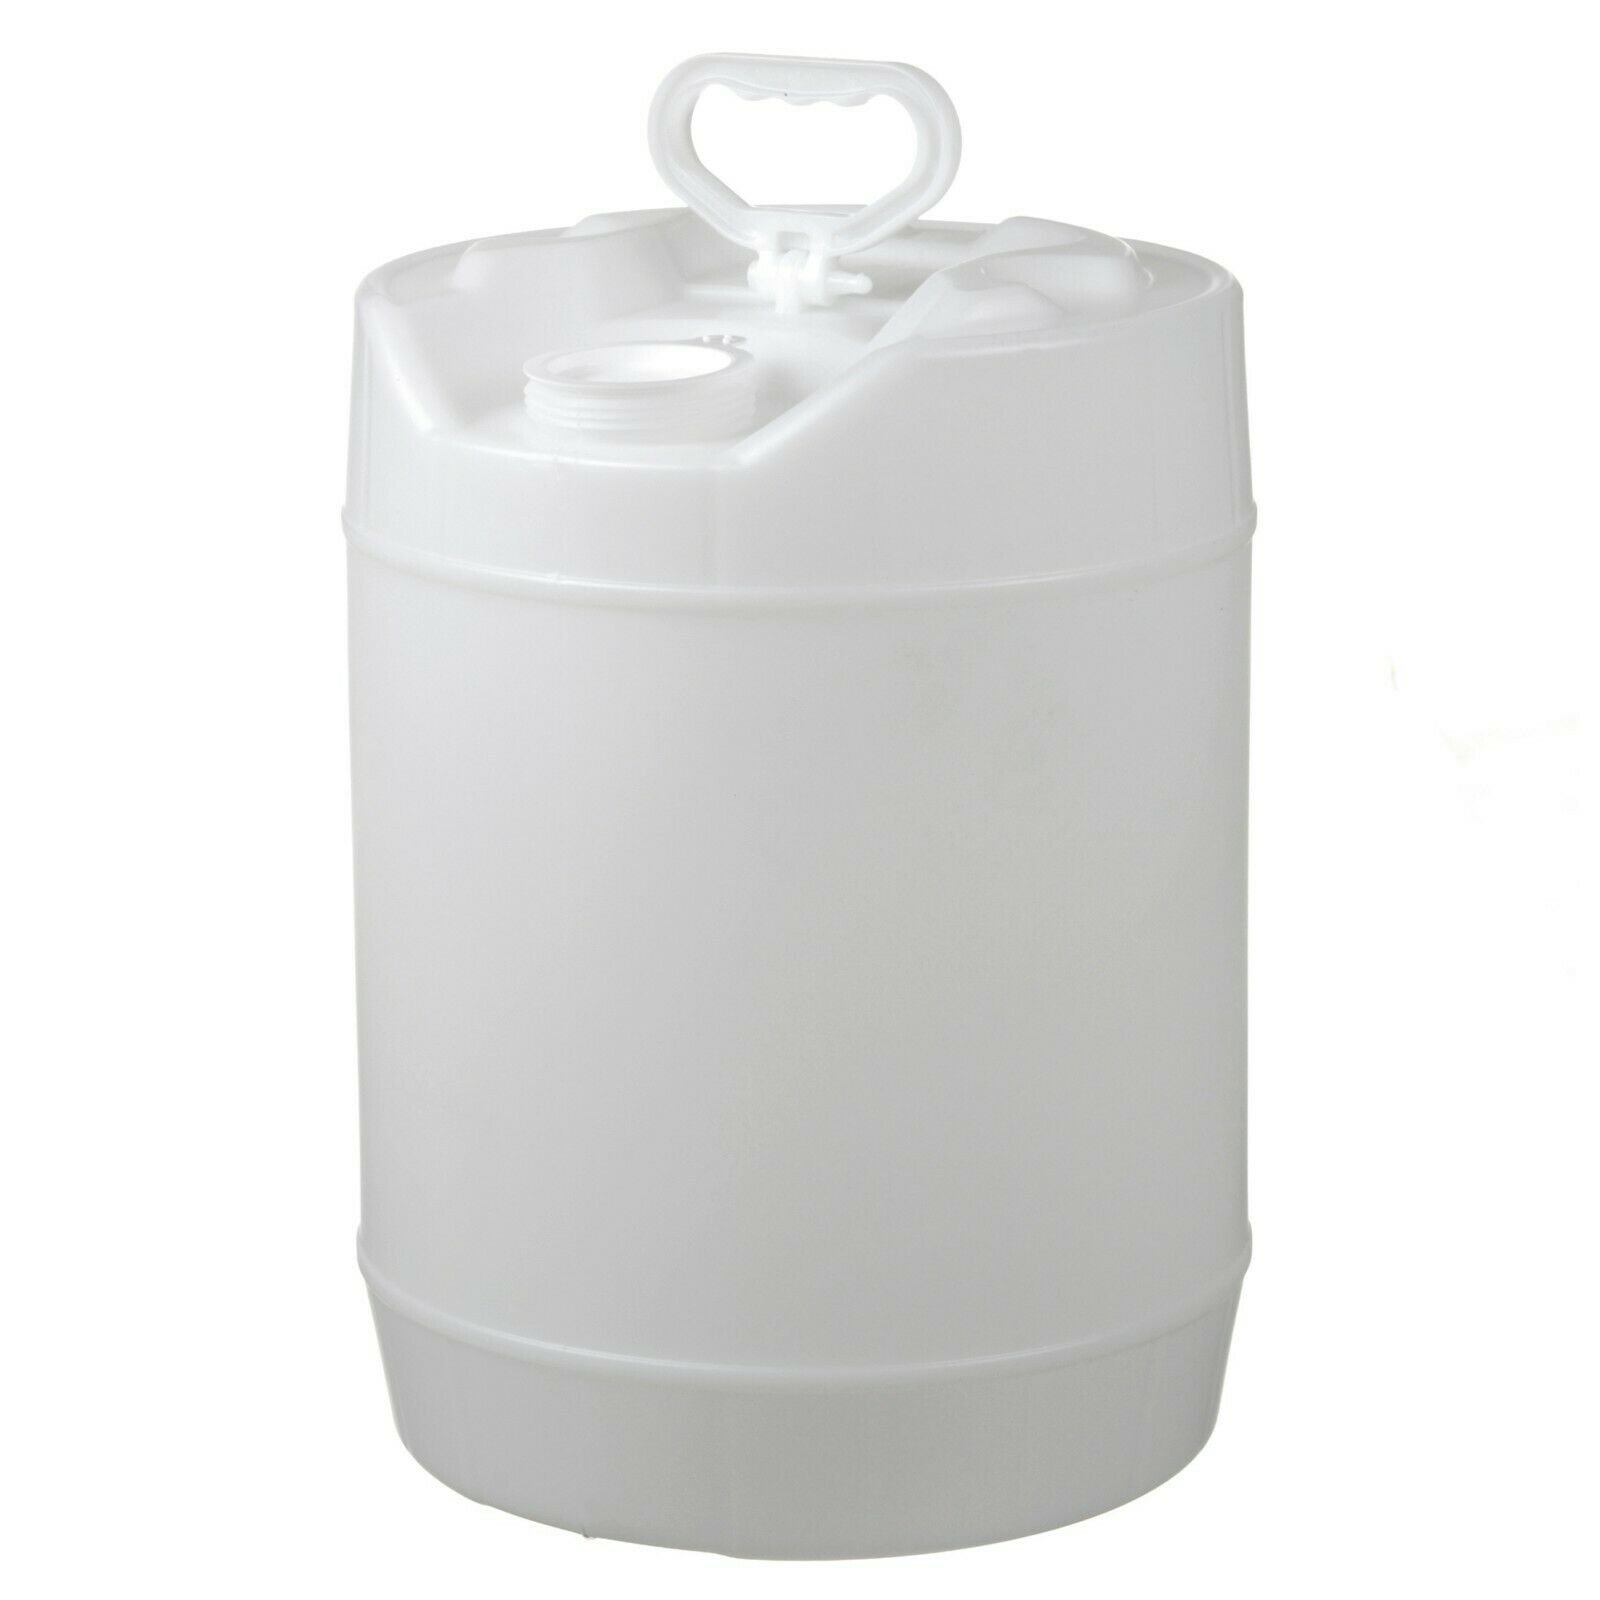 5 Gallon Round Natural Hdpe Plastic Tight Head Container/ Water Jug & Cap